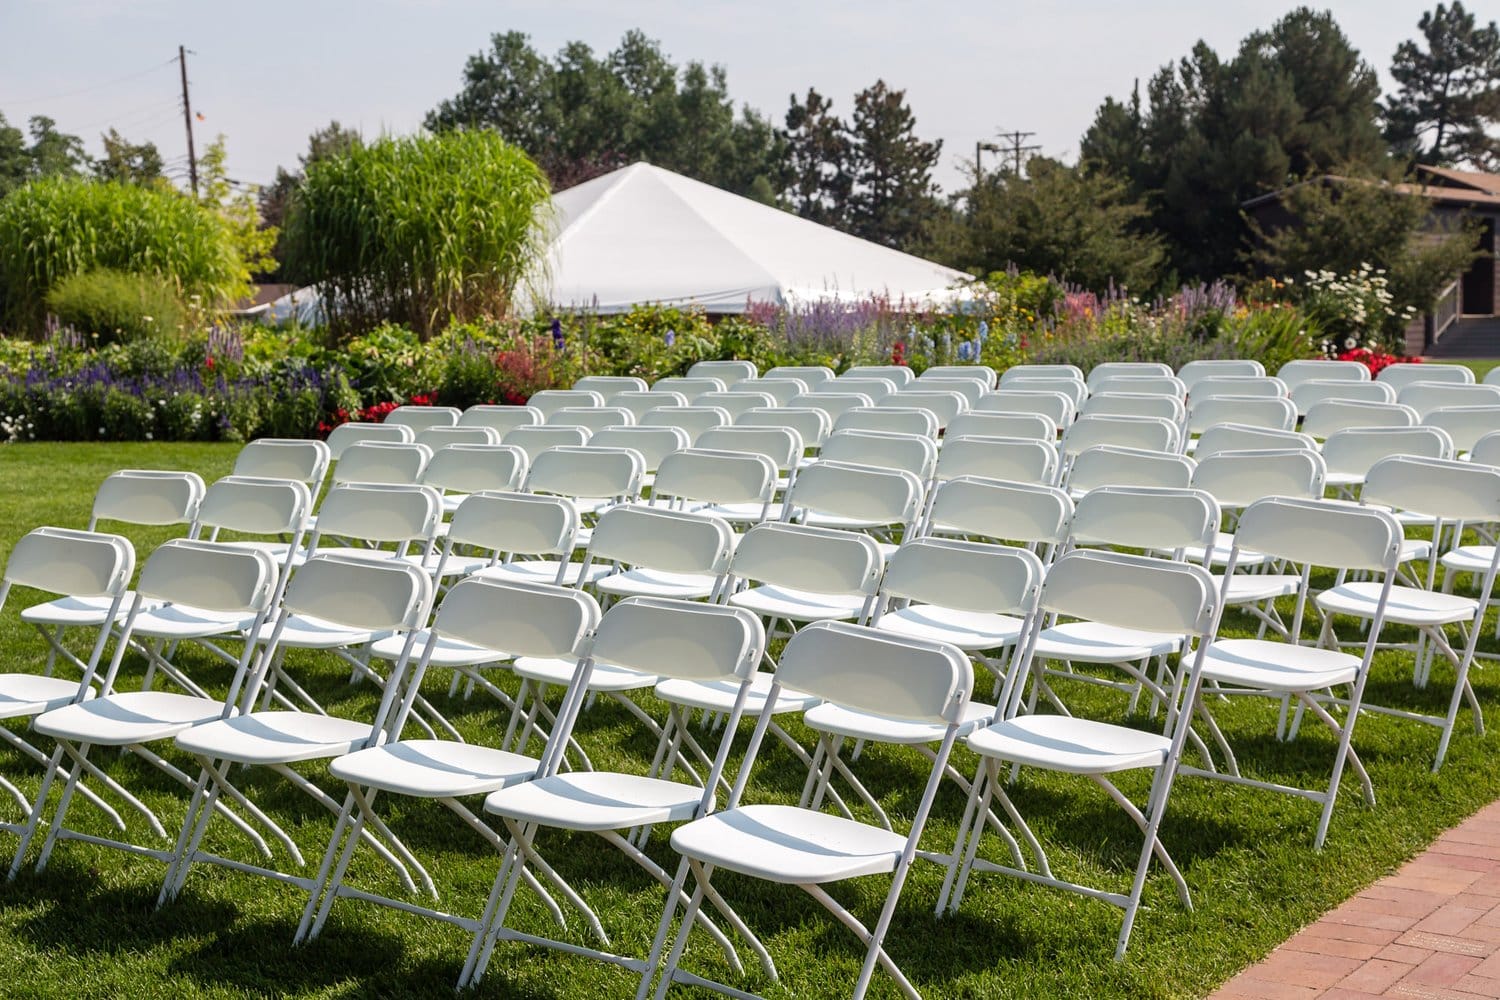 Why Choosing Chair Rentals is the Savvy Decision